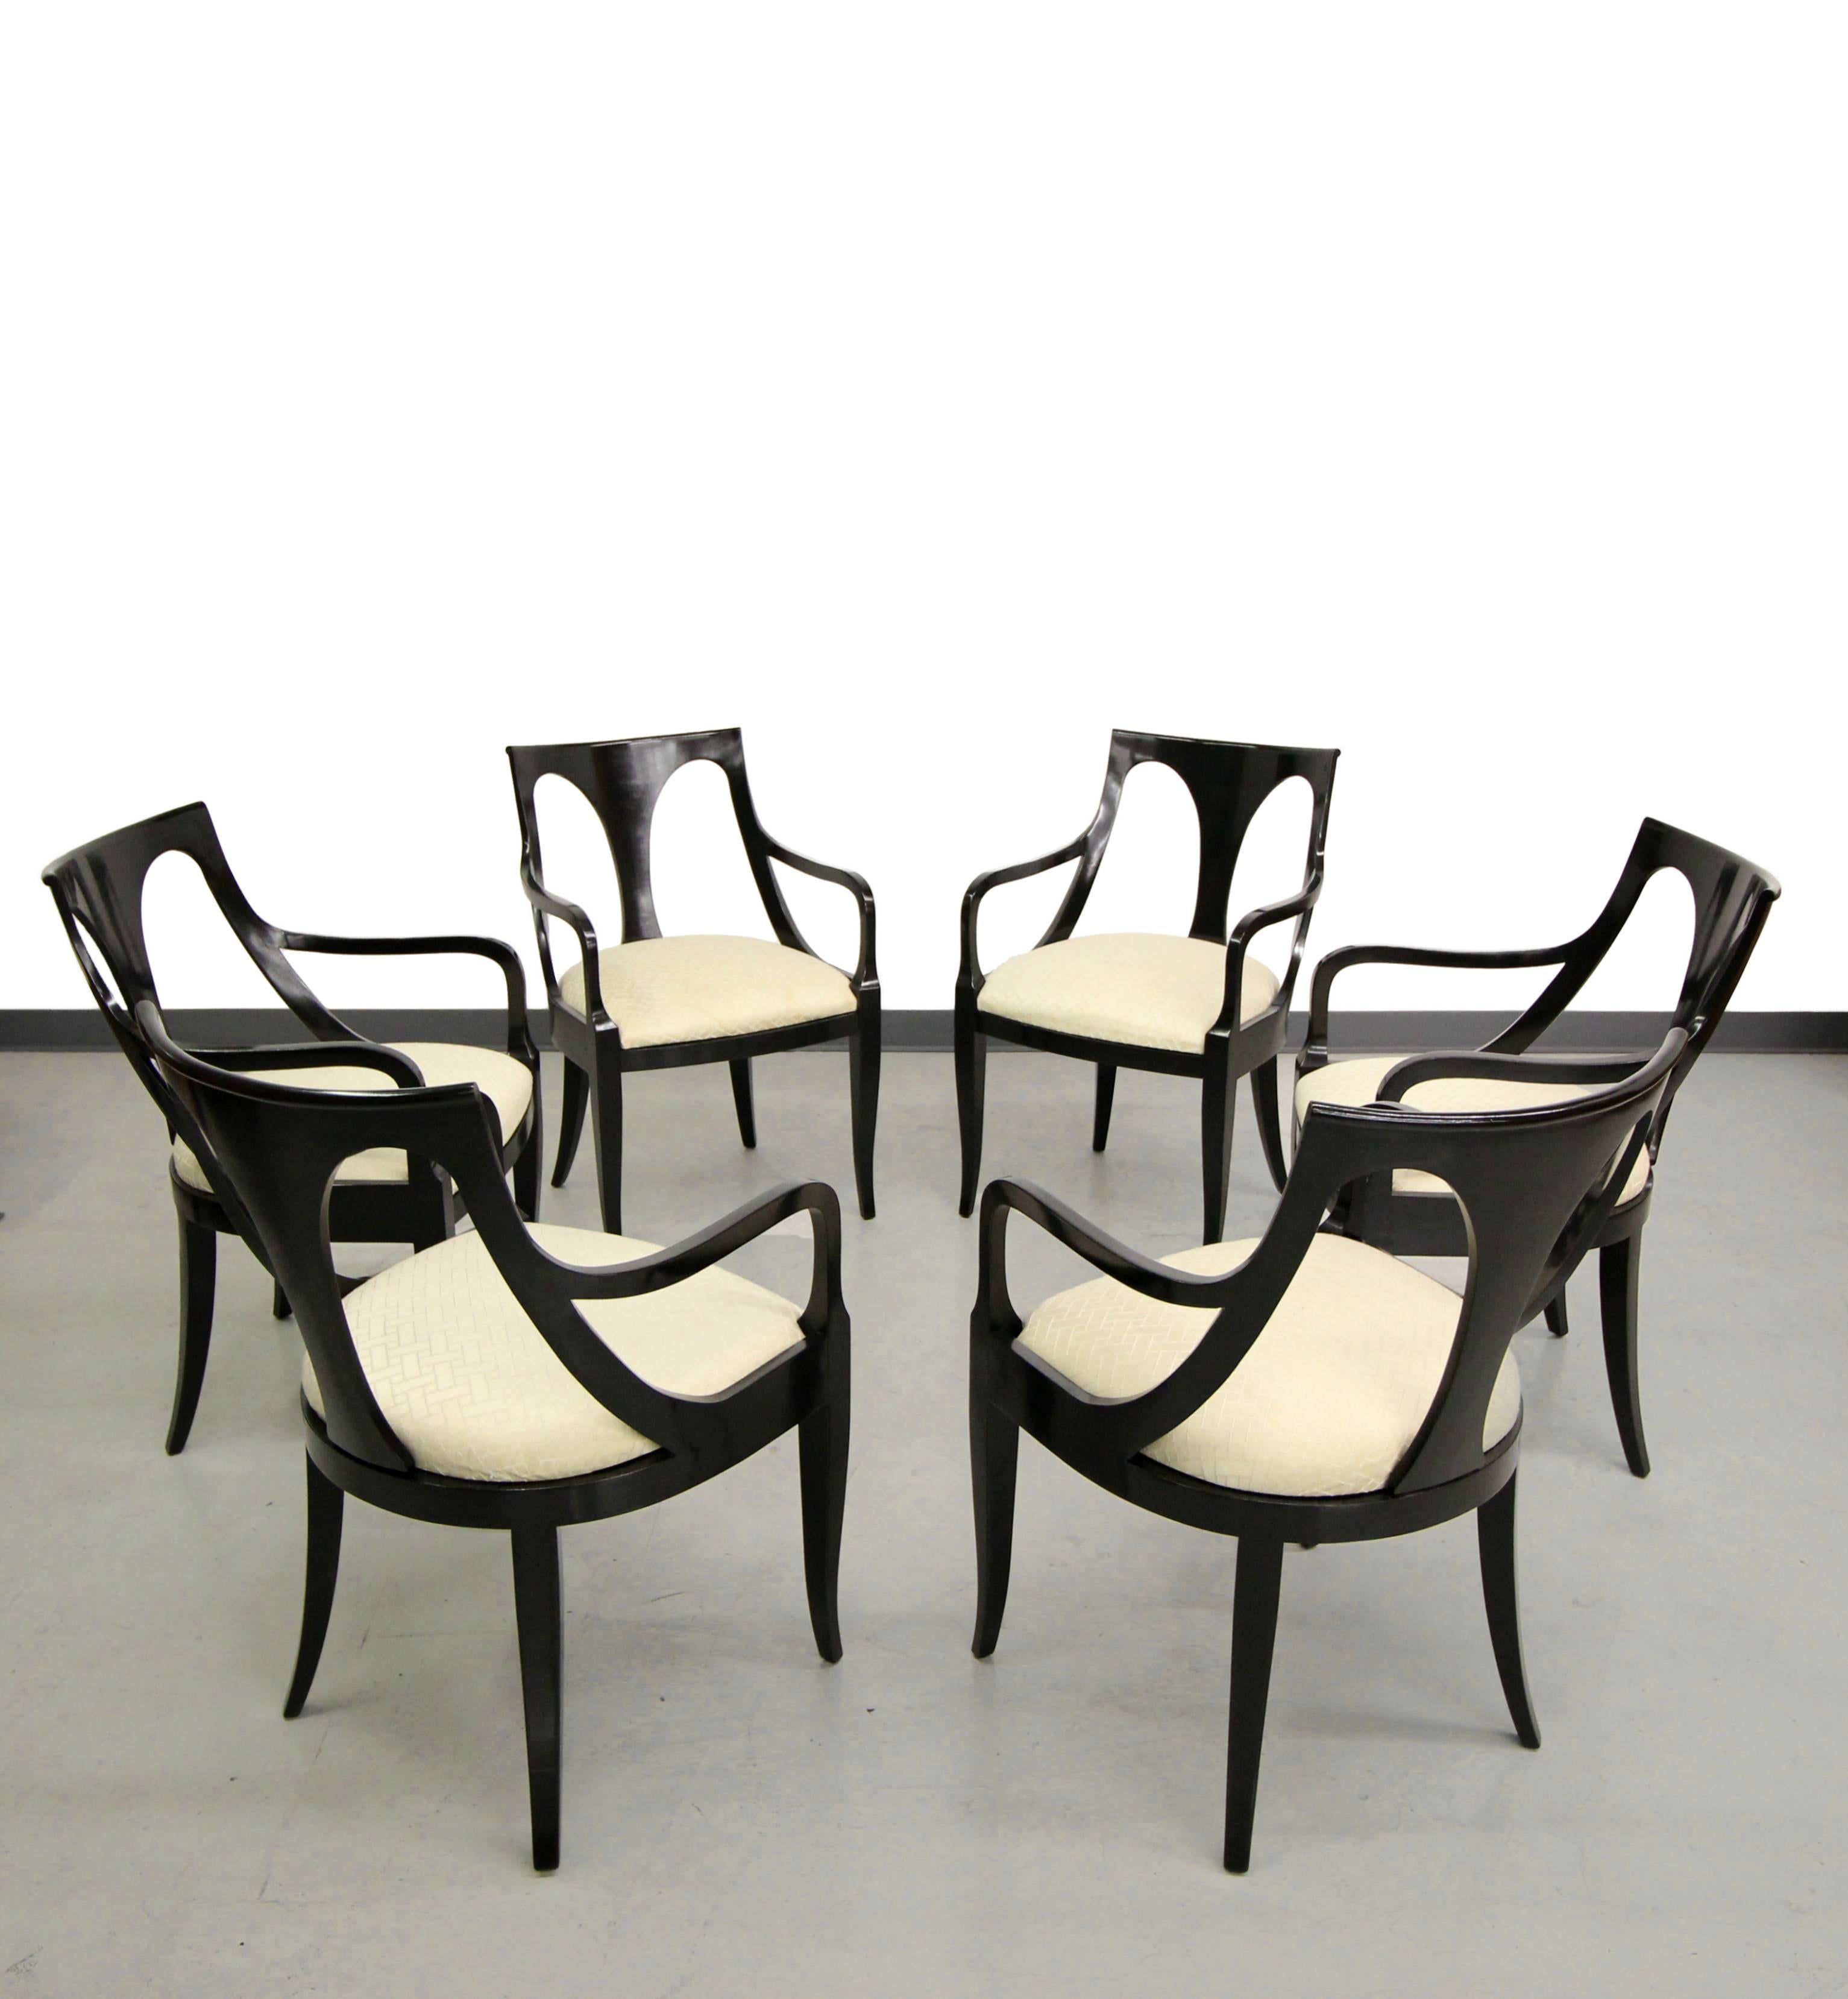 Absolutely gorgeous set of 6 black mid century modern dining chairs by Kindel Furniture.  For these chairs there are no words.  They are absolutely stunning.  Chairs are in superb condition however reupholstery is suggested and can be provided.